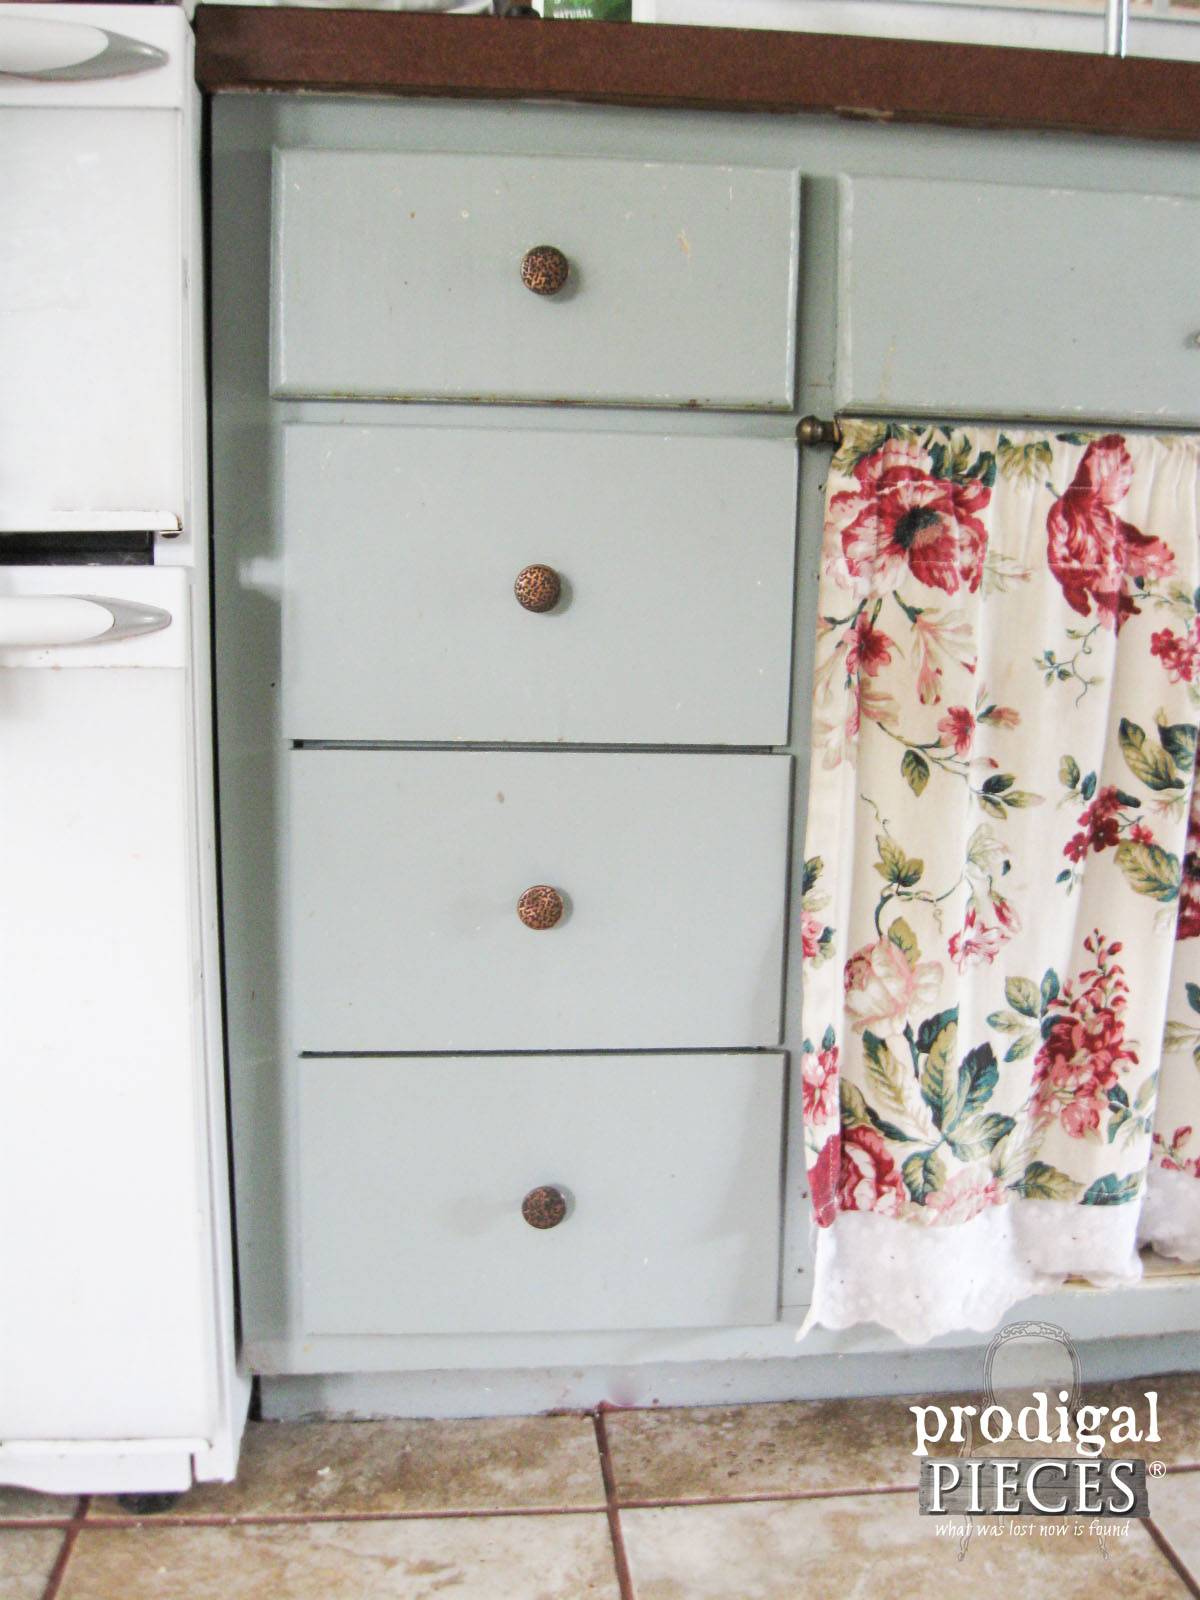 Farmhouse Kitchen Remodel Continues with the Drawers | Prodigal Pieces | www.prodigalpieces.com